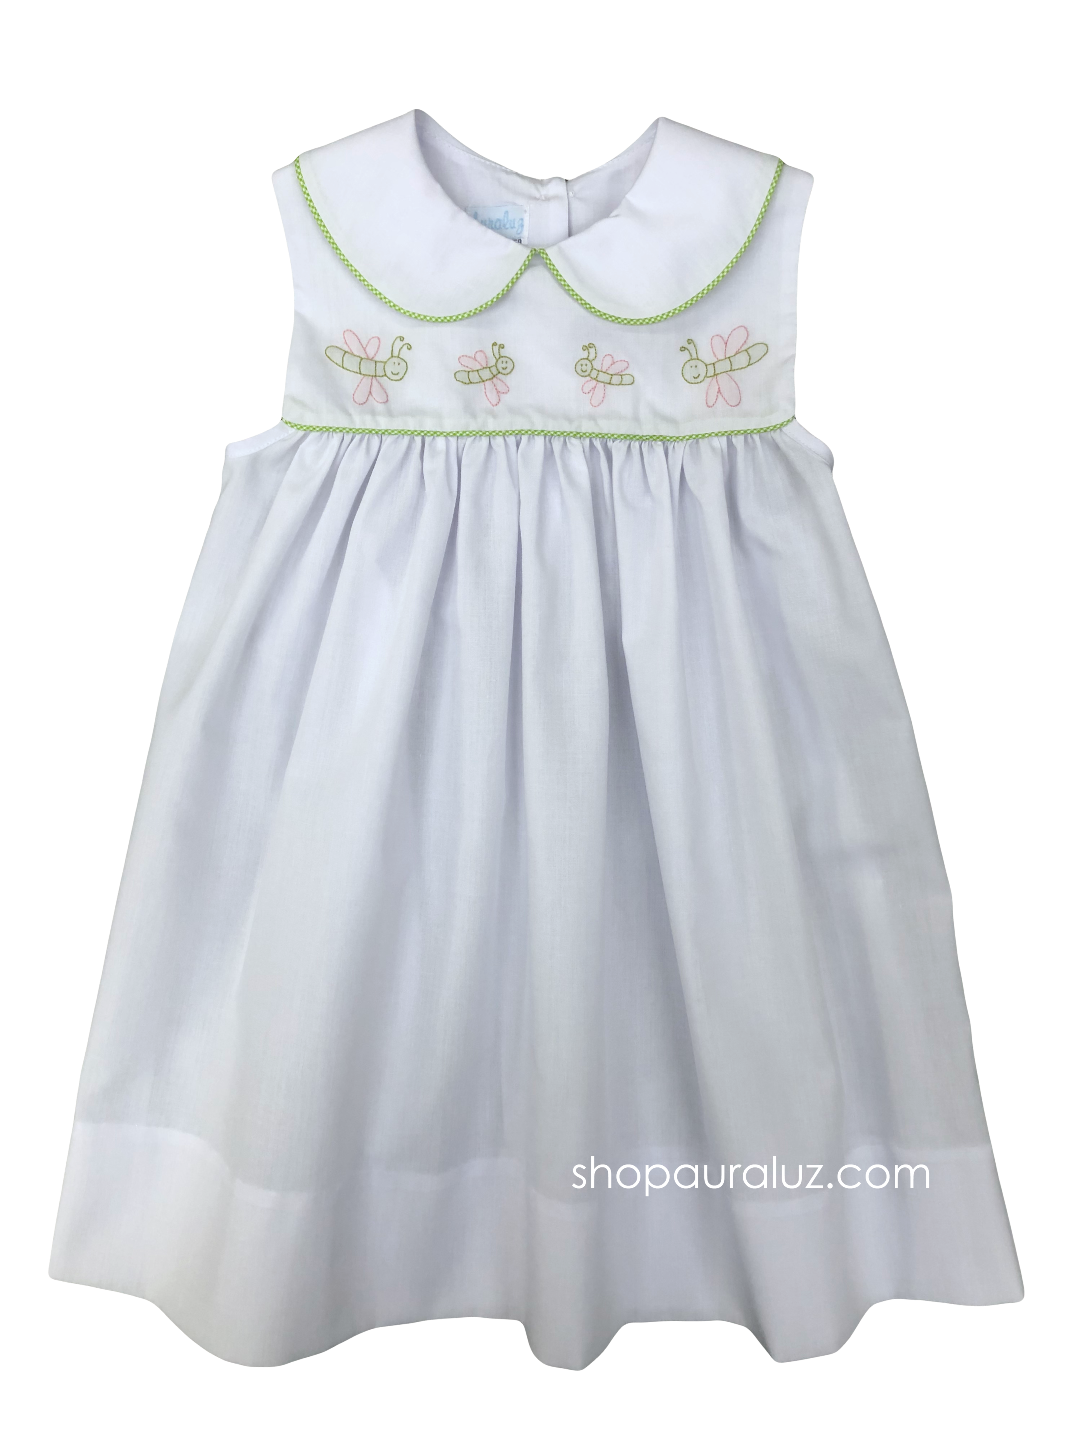 Auraluz Sleeveless Dress...White with lime check trim and embroidered dragonflies